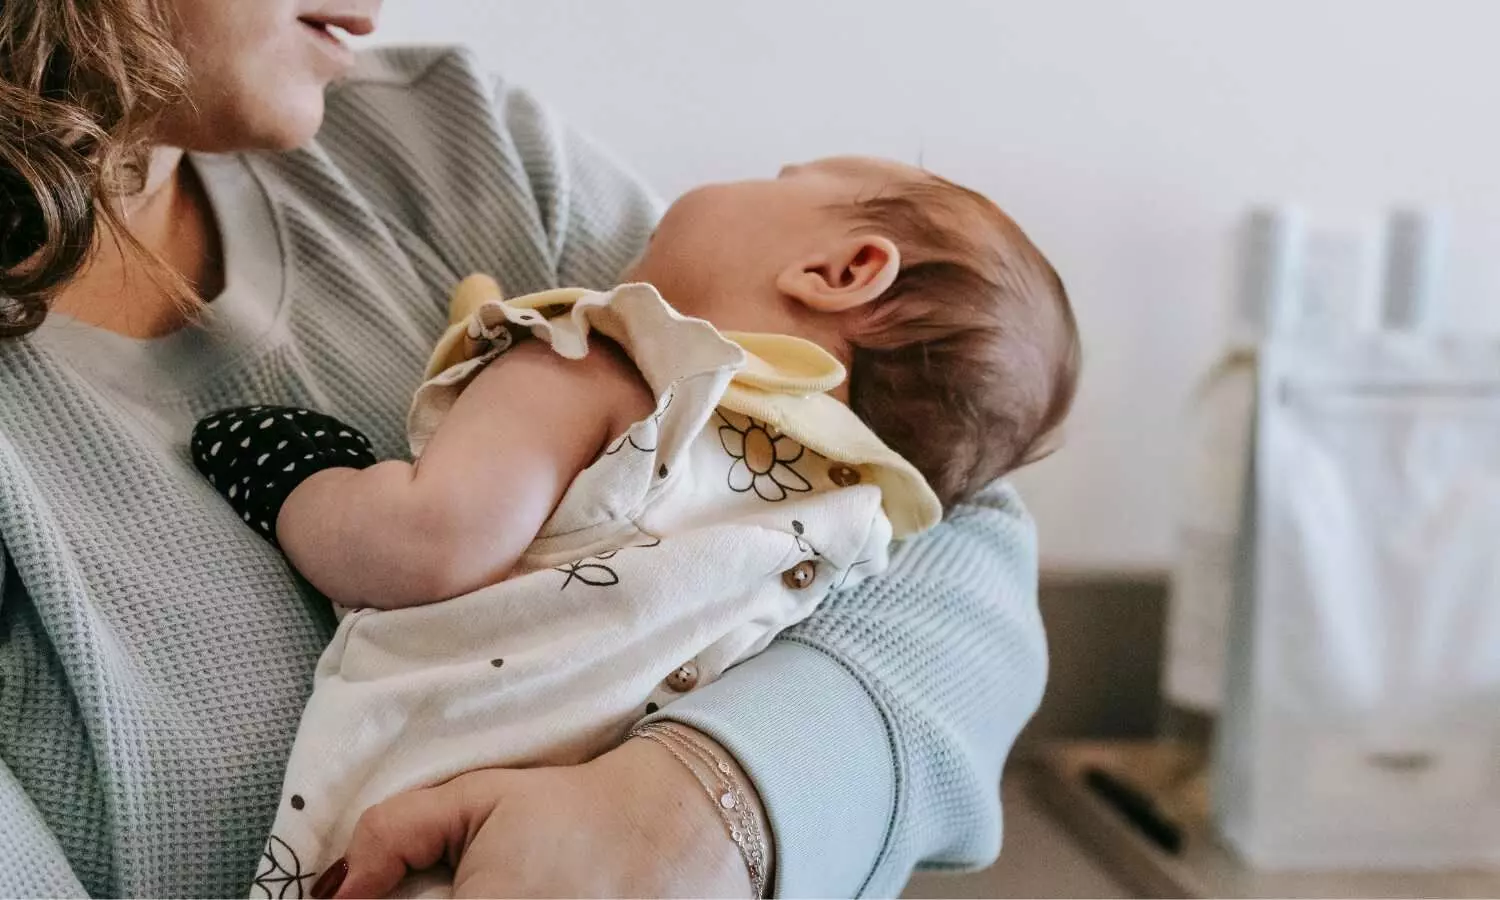 Breastfeeding may reduce arsenic exposure in infants in arsenic-contaminated areas